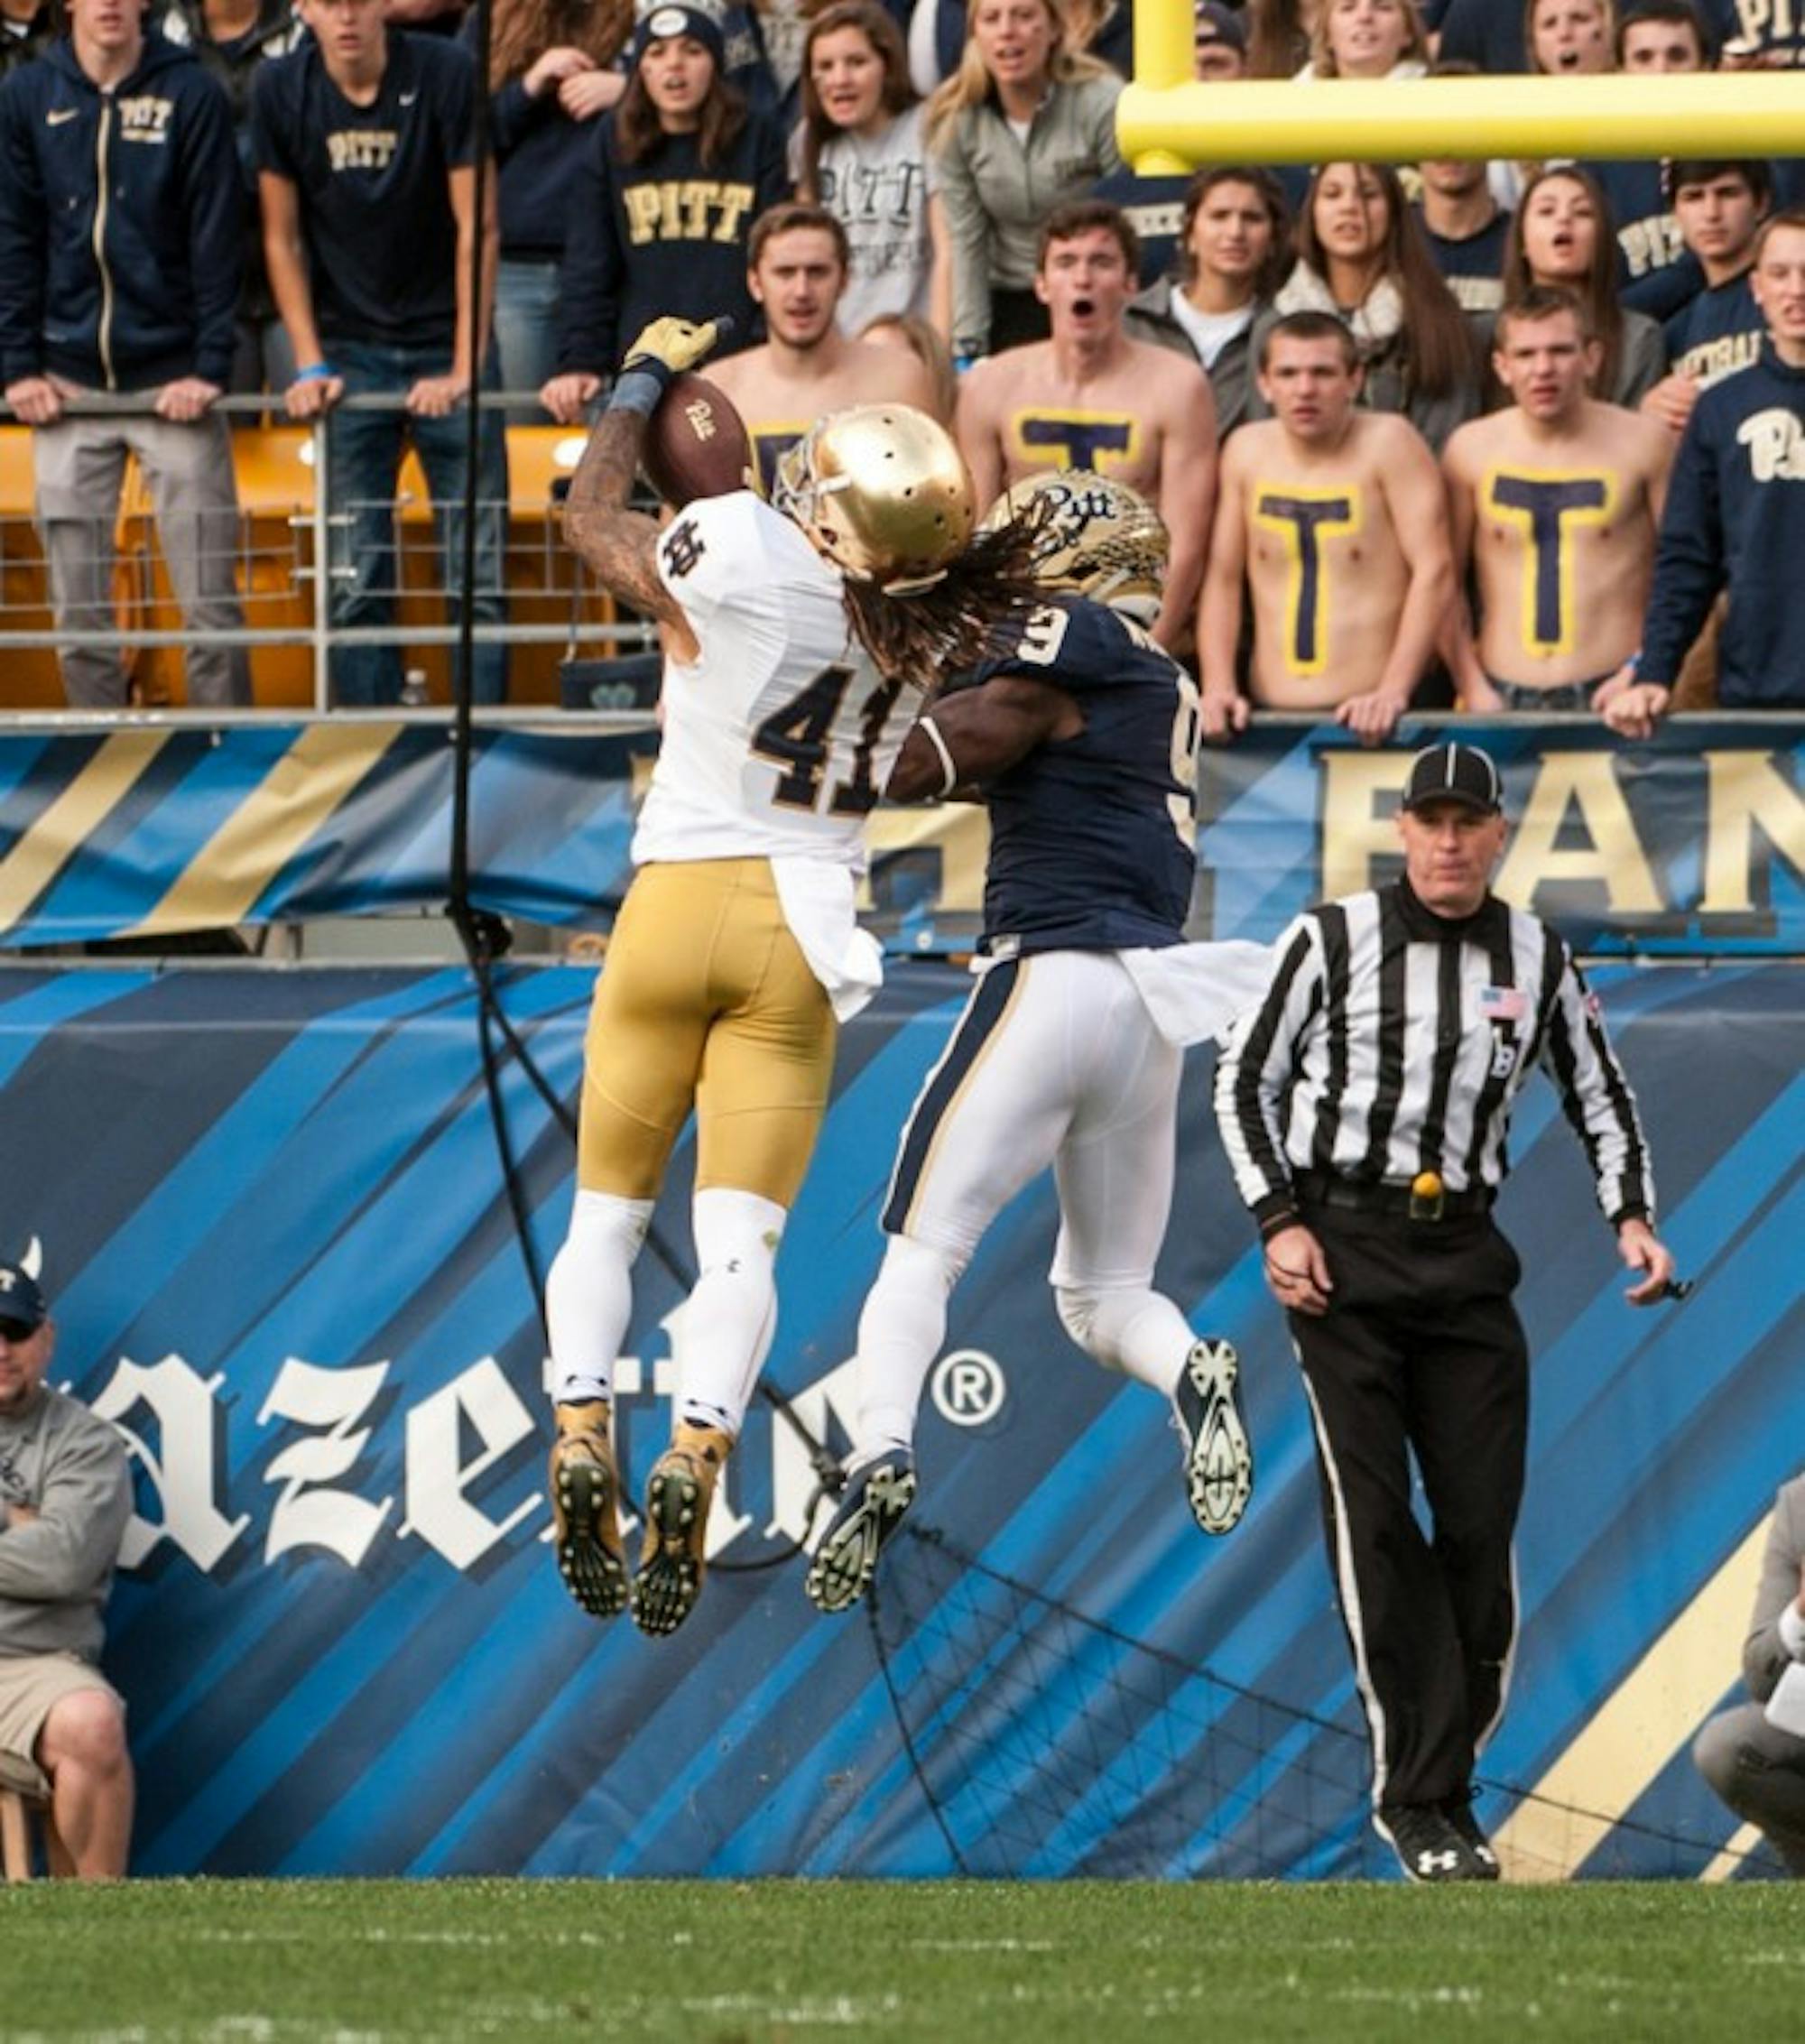 Irish graduate student cornerback Matthias Farley comes down with a second-quarter interception during Saturday’s 42-30 win over Pitt at Heinz Field. Down 14-3, the Panthers were driving to cut into Notre Dame’s lead, but Farley’s interception of Panthers redshirt junior quarterback Nate Peterman at the 1-yard line kept the Irish two scores ahead.